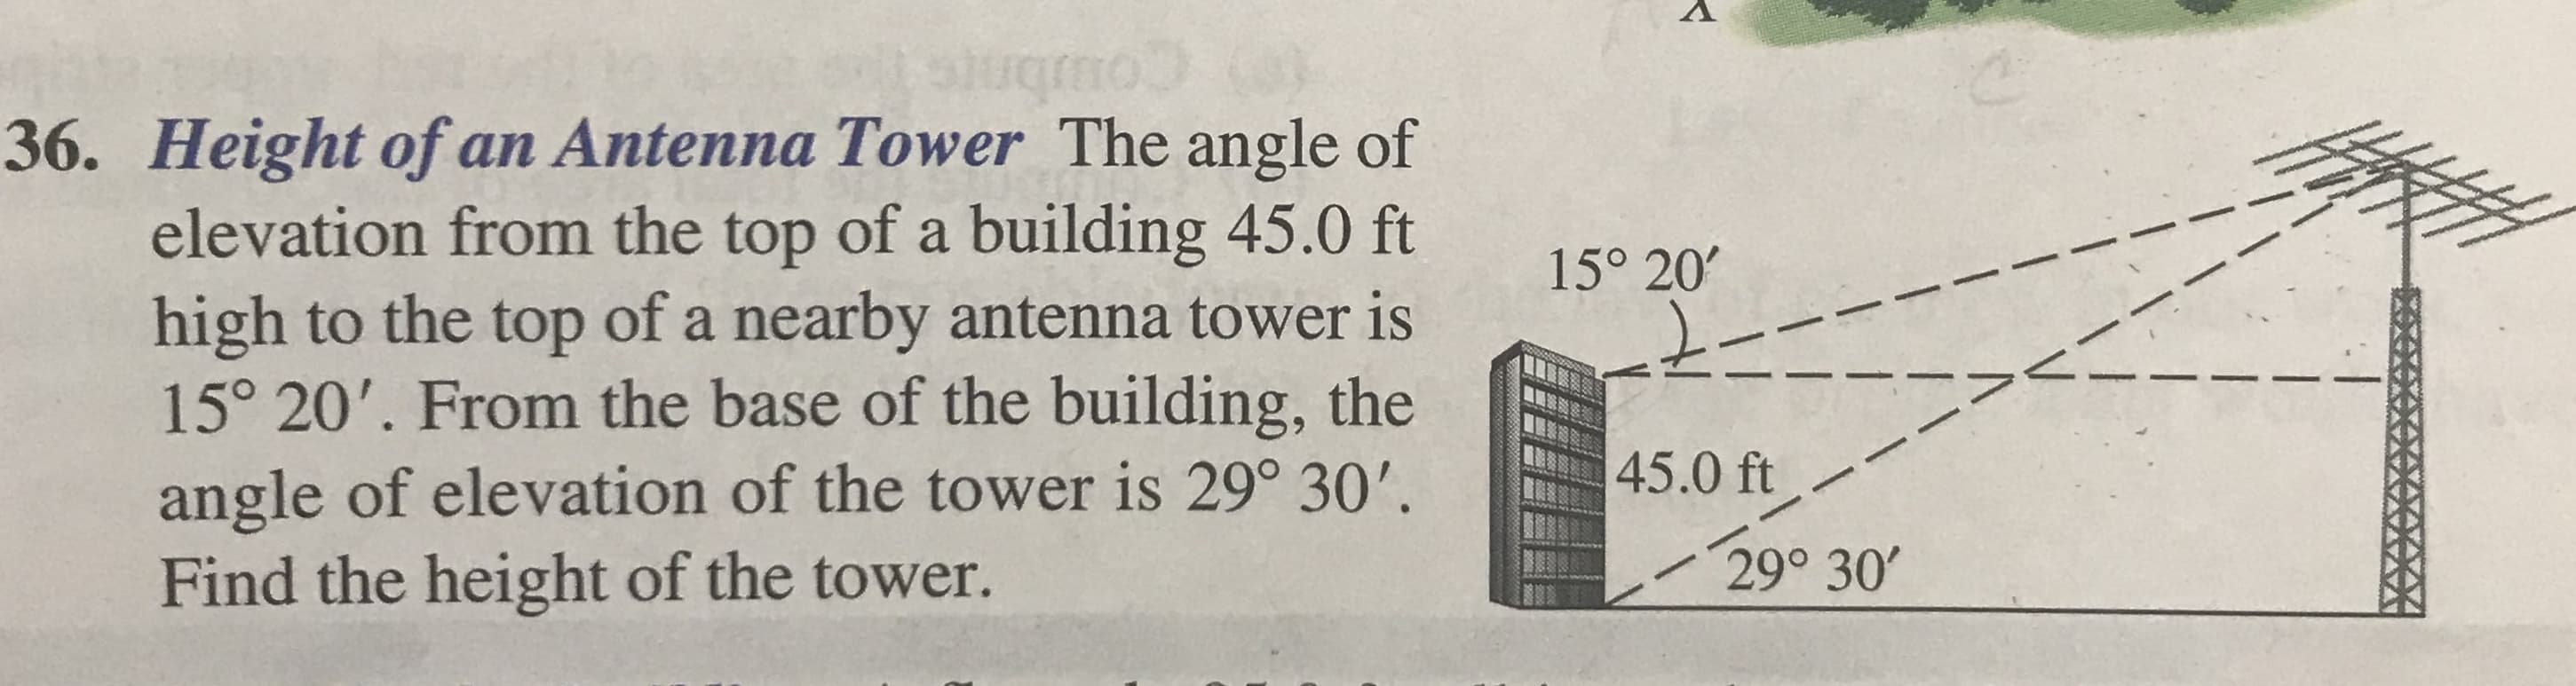 36. Height of an Antenna Tower The angle of
elevation from the top of a building 45.0 ft
high to the top of a nearby antenna tower is
15° 20'. From the base of the building, the
angle of elevation of the tower is 29° 30'.
Find the height of the tower.
15° 20'
45.0 ft
29° 30
